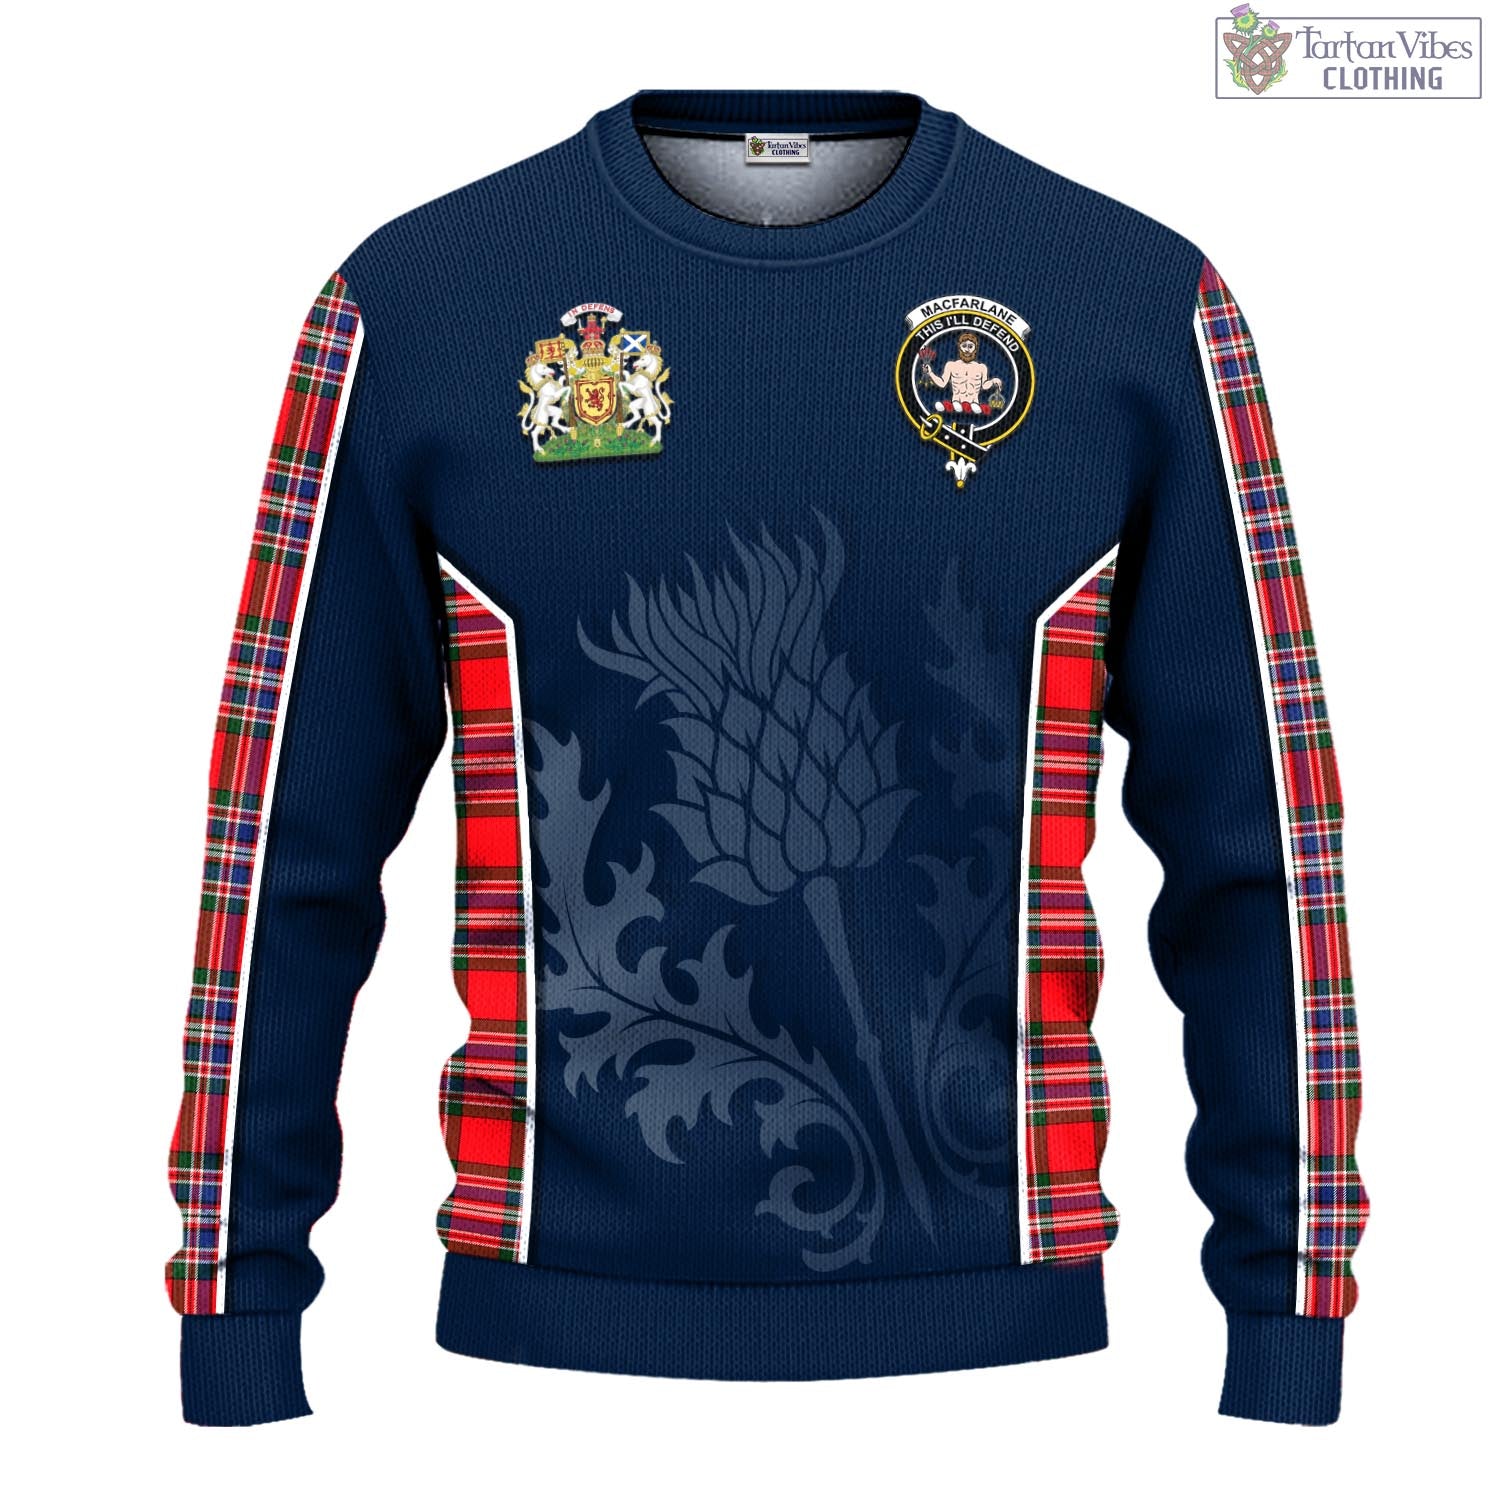 Tartan Vibes Clothing MacFarlane Modern Tartan Knitted Sweatshirt with Family Crest and Scottish Thistle Vibes Sport Style